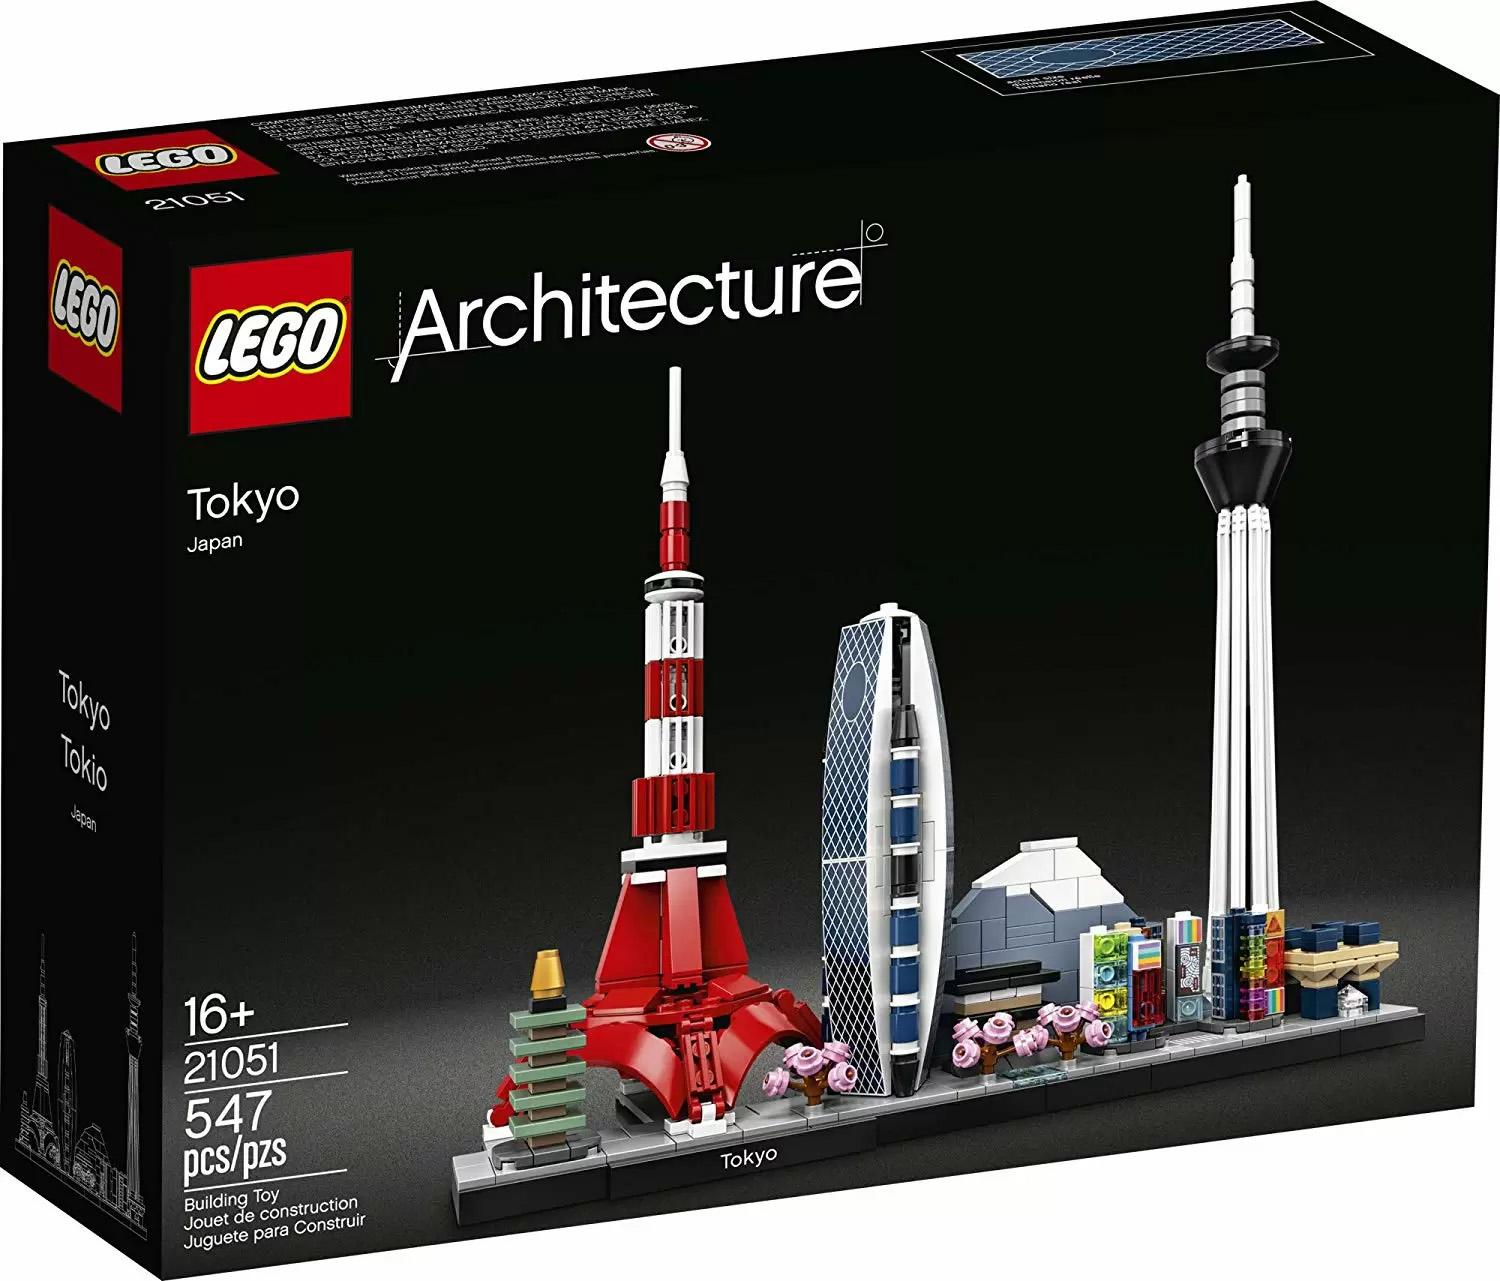 Lego 547-Piece Architecture Skylines Tokyo Building Kit for $47.99 Shipped